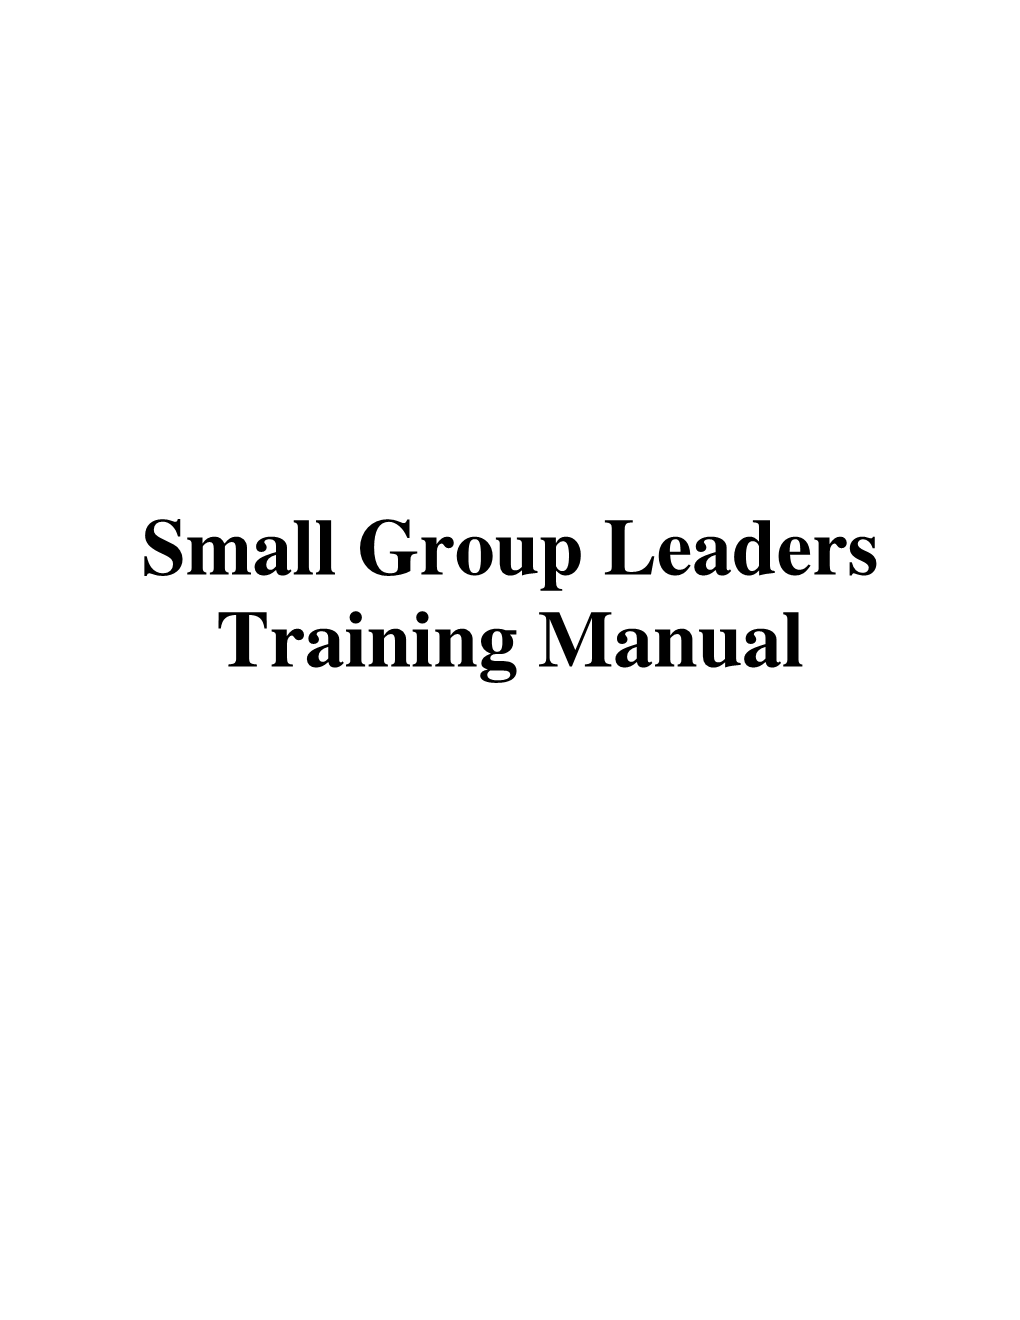 Small Group Leaders Training Manual